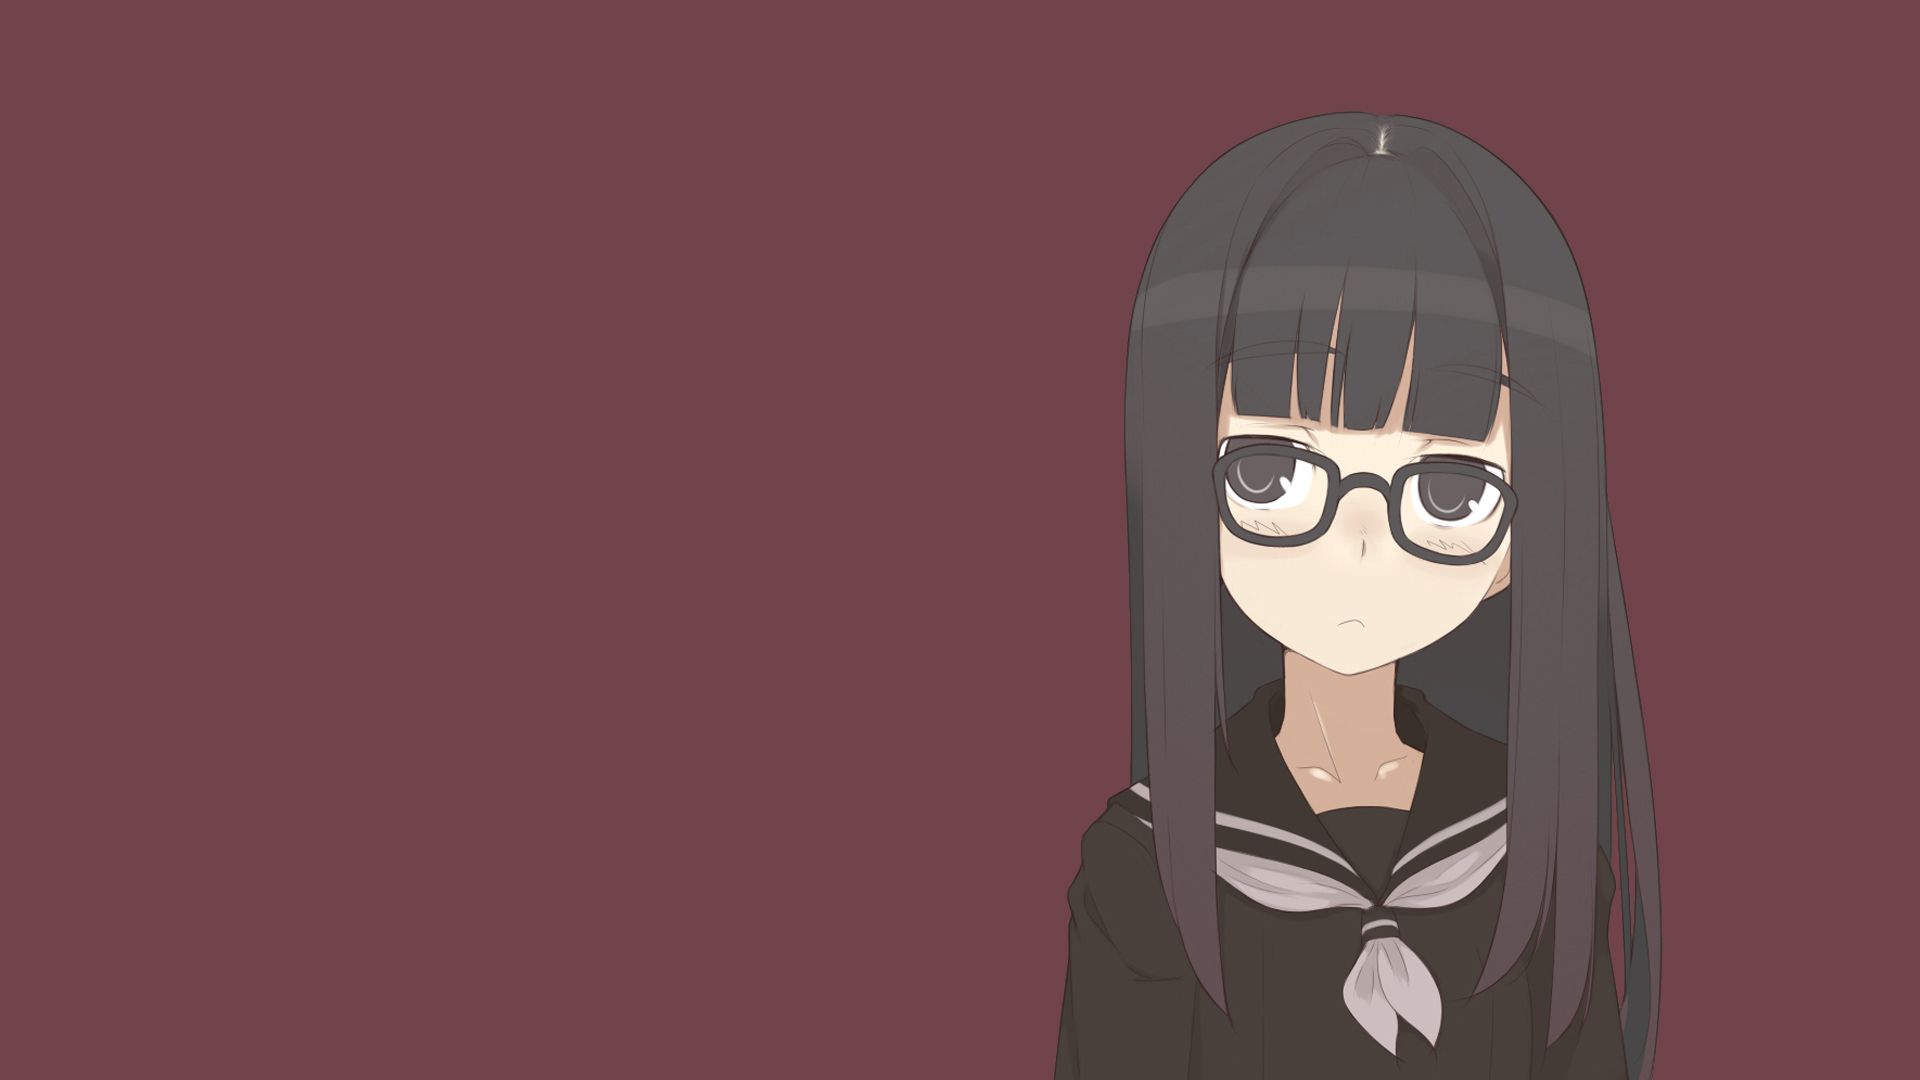 Girl with Glasses Anime Wallpaper Free Girl with Glasses Anime Background